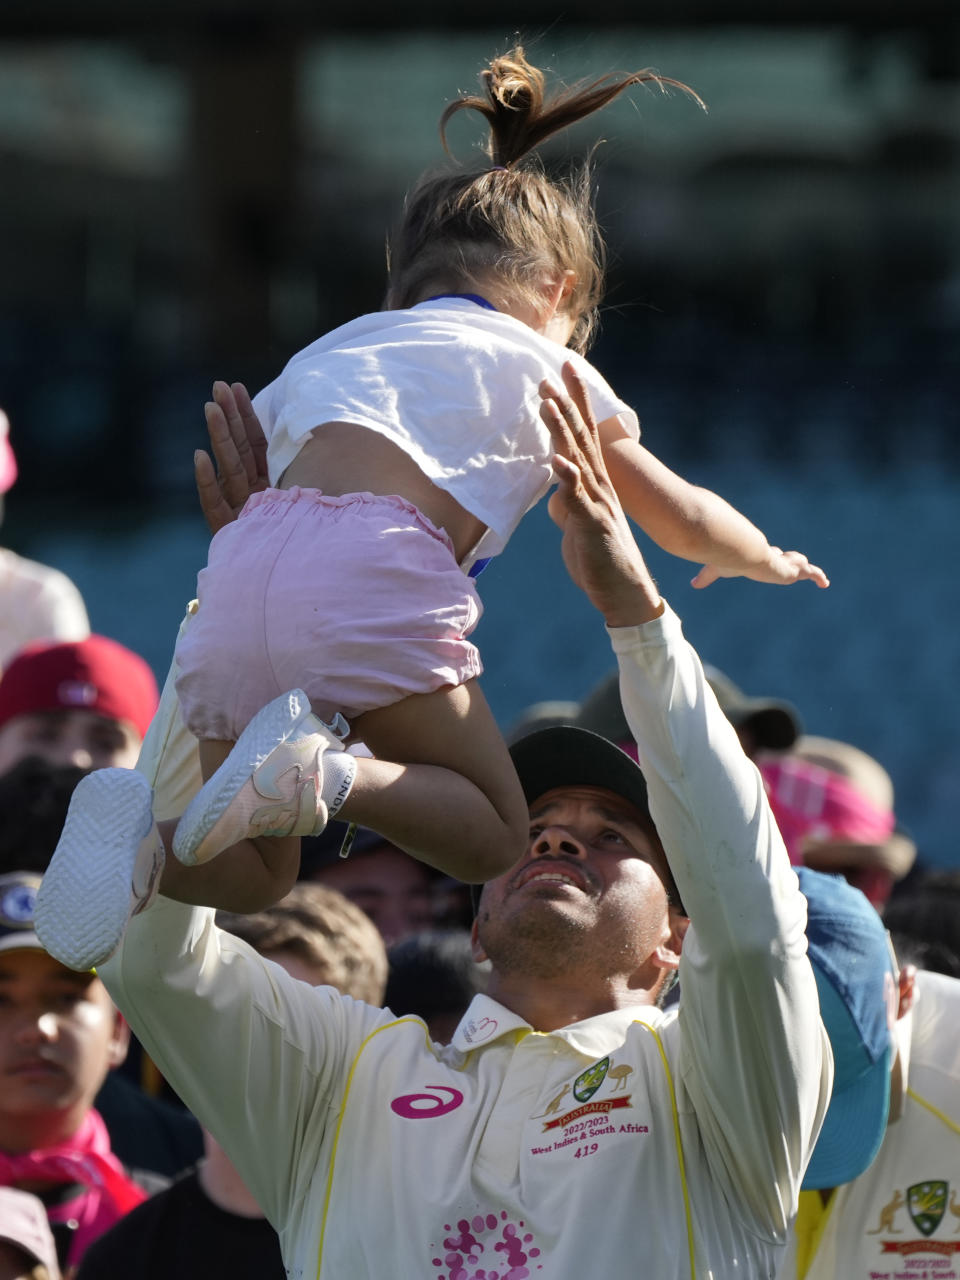 Man of the match Australia's Usman Khawaja plays with his daughter, Aisha, the end of their cricket test match against South Africa at the Sydney Cricket Ground in Sydney, Sunday, Jan. 8, 2023. The match ended in a draw and Australia won the series 2-0. (AP Photo/Rick Rycroft)